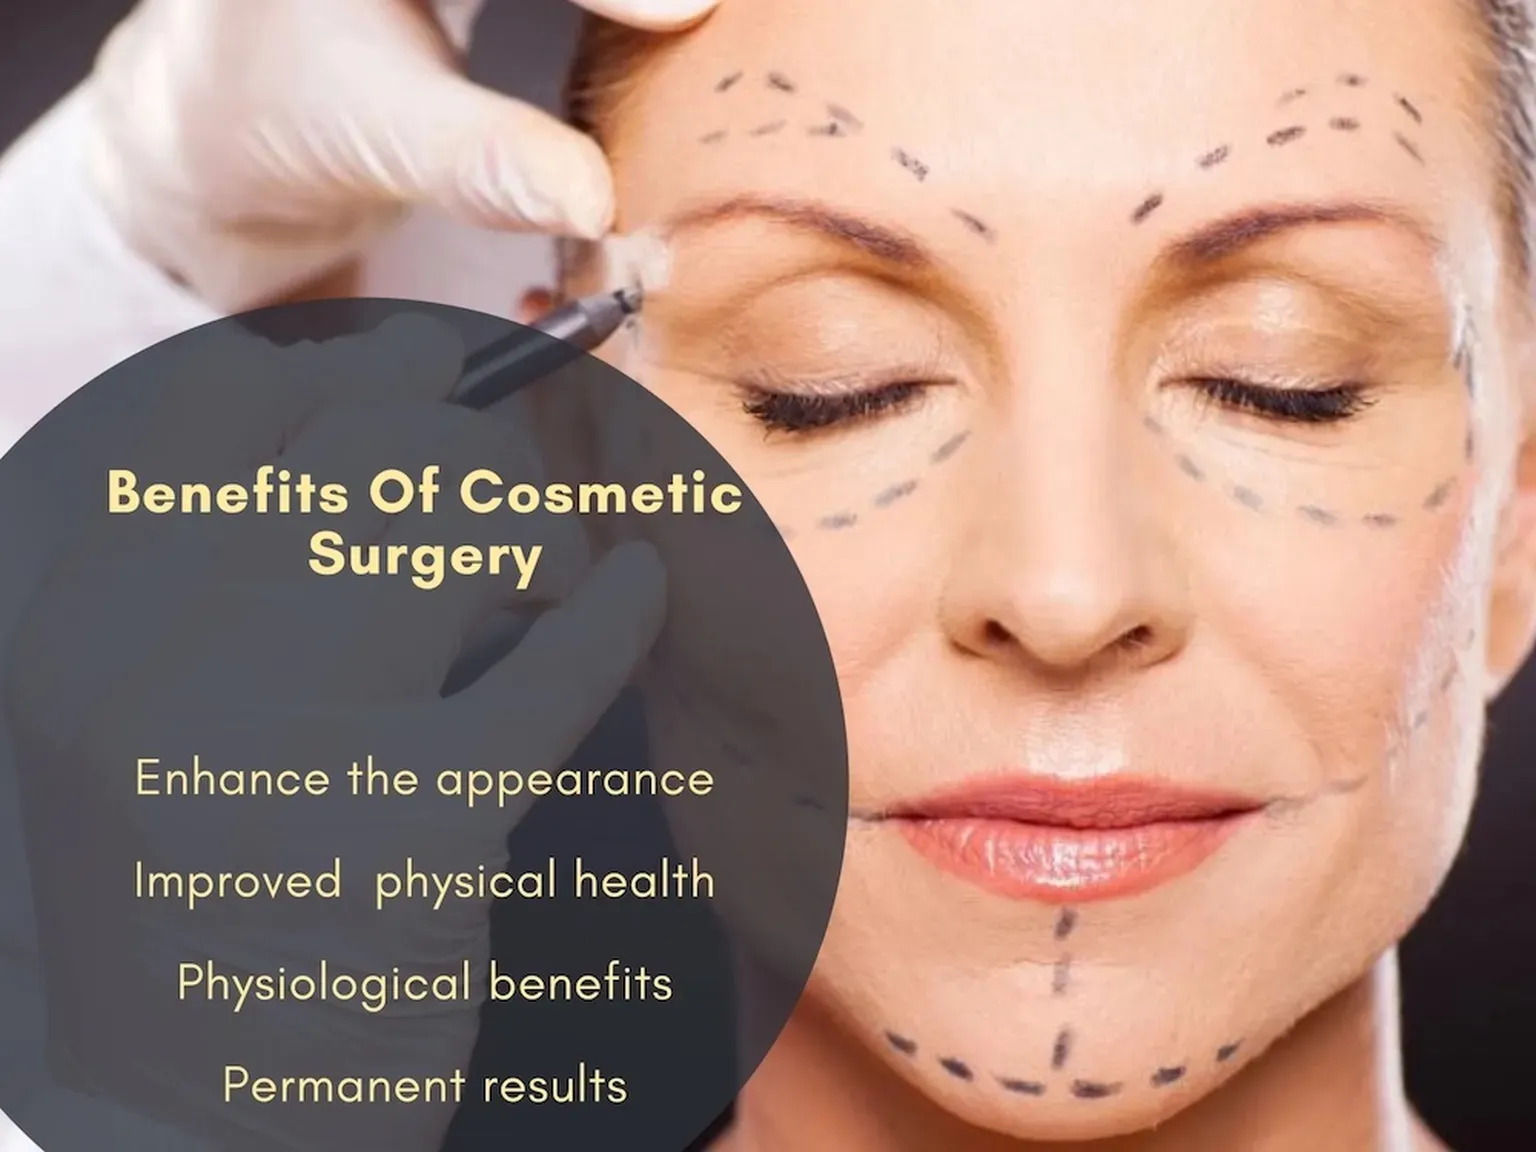 Benefits of Cosmetic Surgery